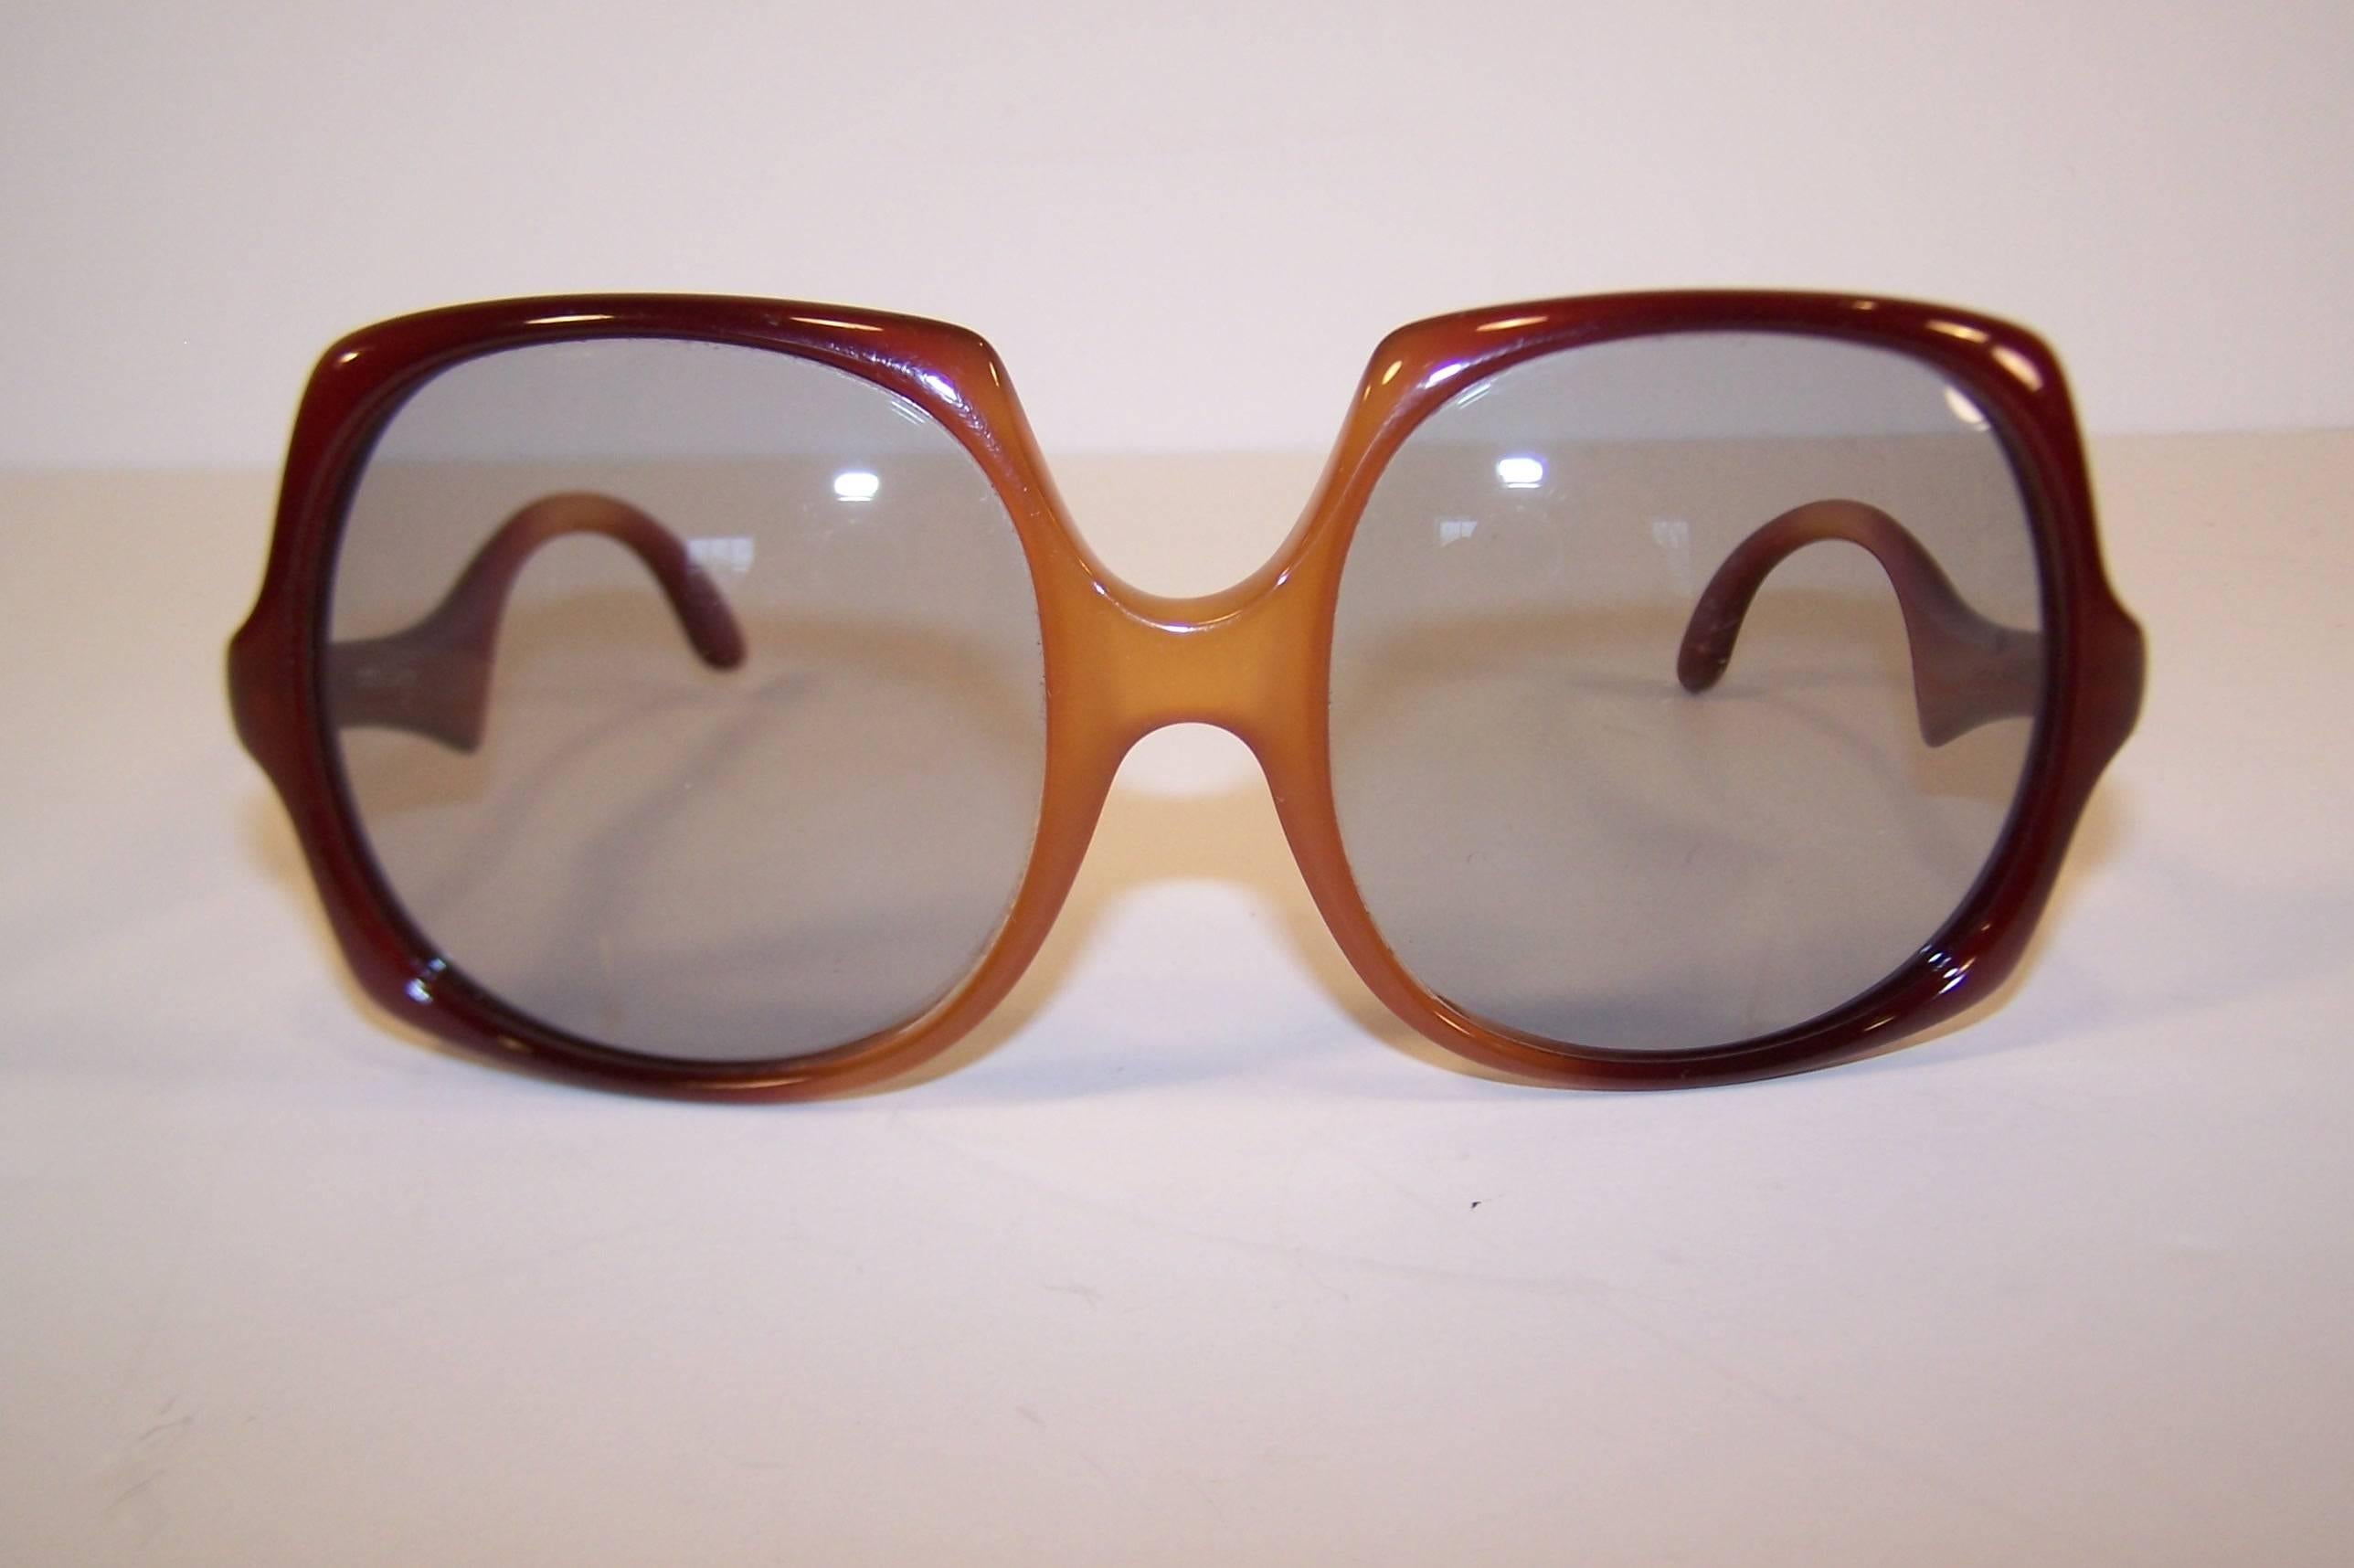 Square but far from 'square'!  These 1970's oversized mod sunglasses from Optyl Design feature a creamy caramel frame with light gray lenses.  The sculptural arms have a swoopy shape that provides an additional design element.  Optyl also produced